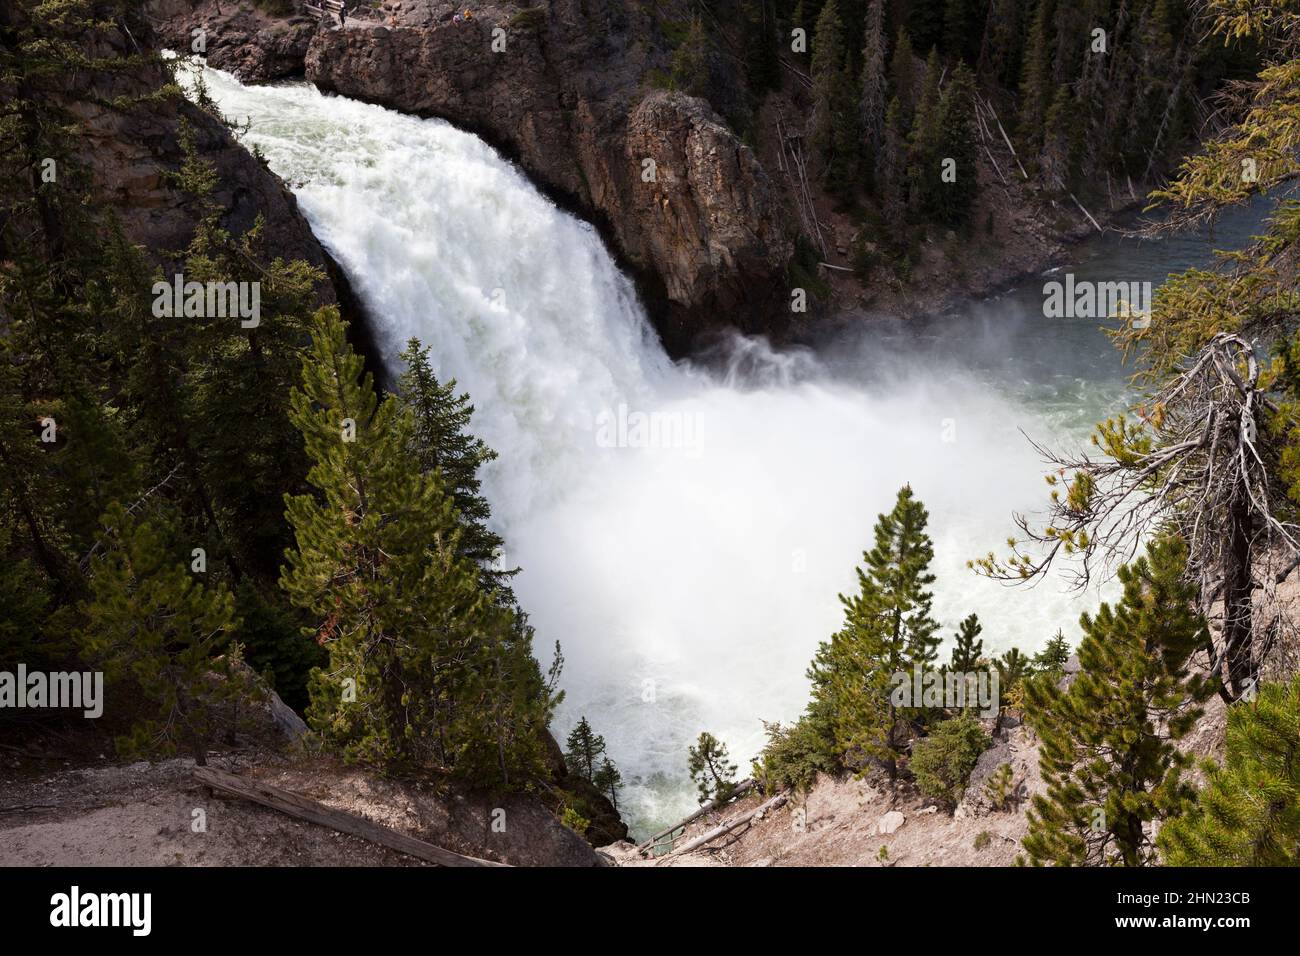 Upper Falls, Yellowstone Grand Canyon, parc national de Yellowstone, Wyoming, États-Unis Banque D'Images